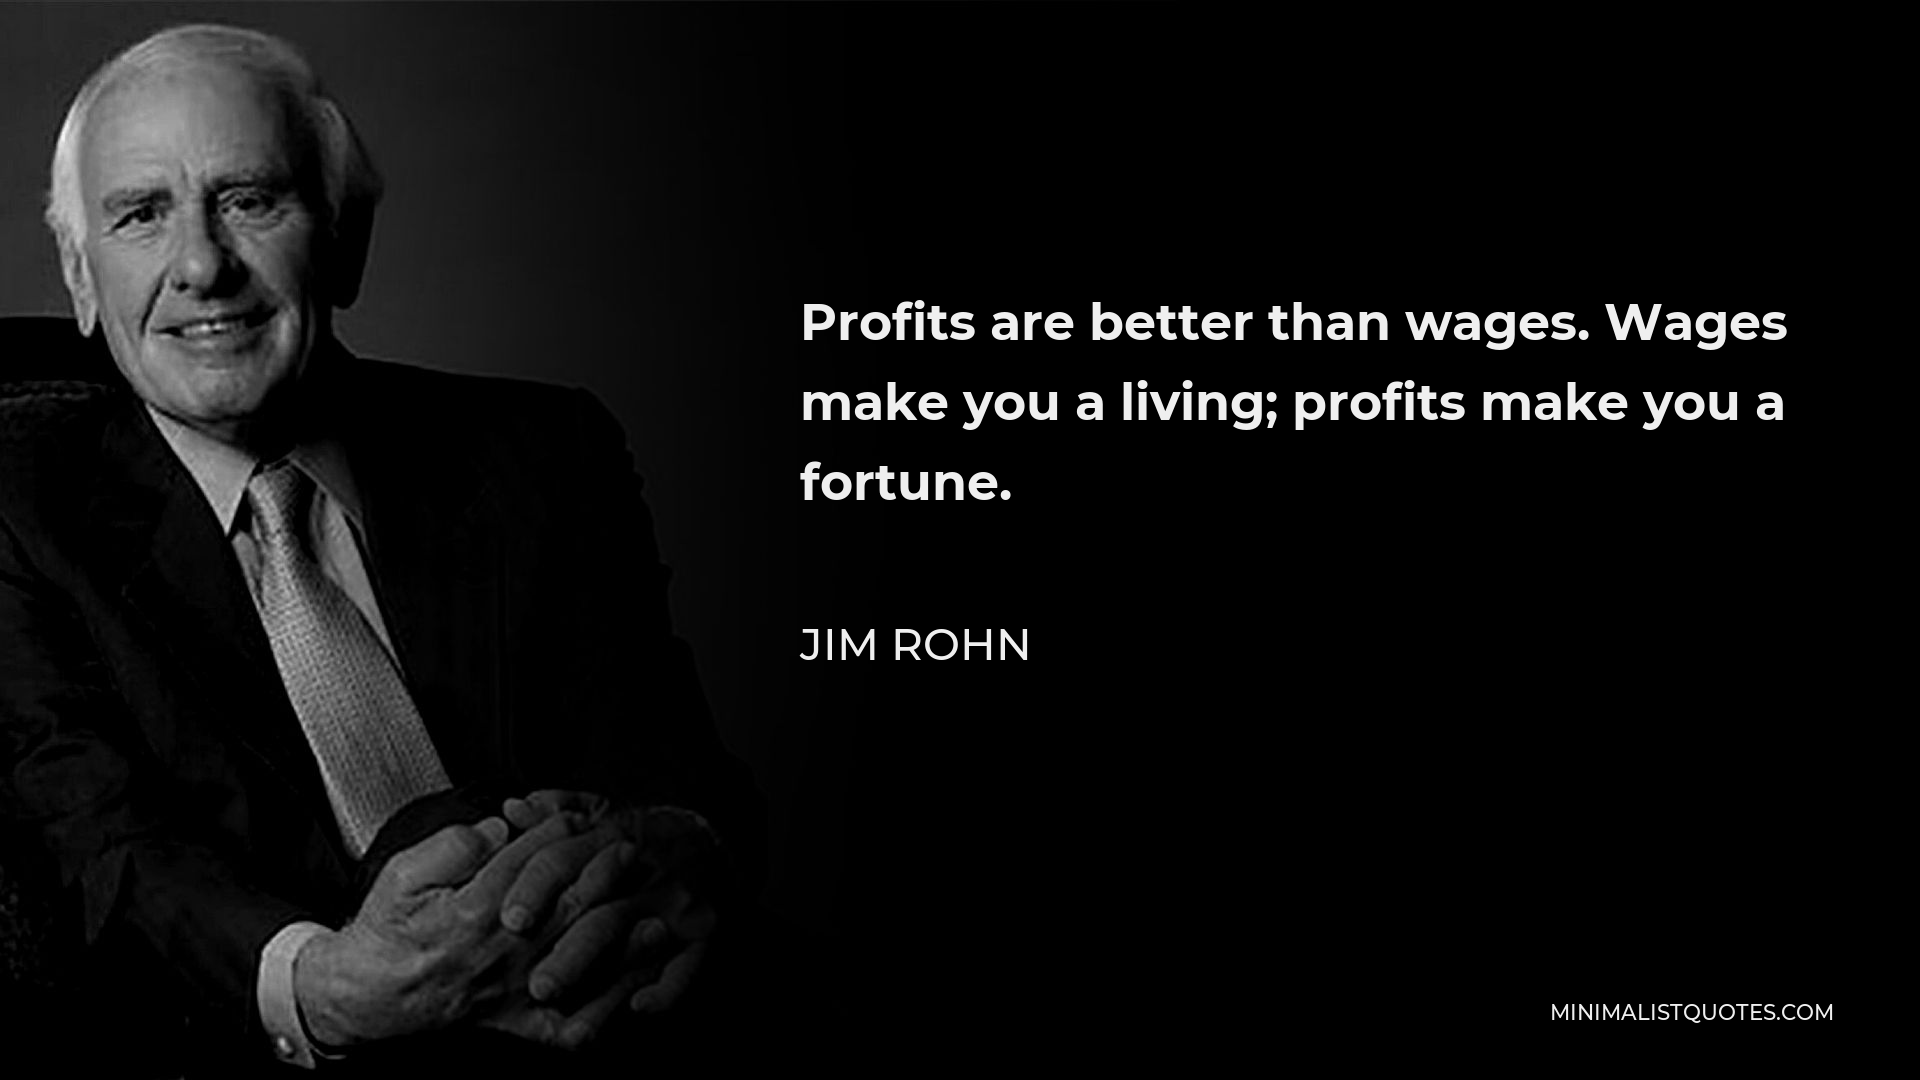 Jim Rohn Quote - Profits are better than wages. Wages make you a living; profits make you a fortune.